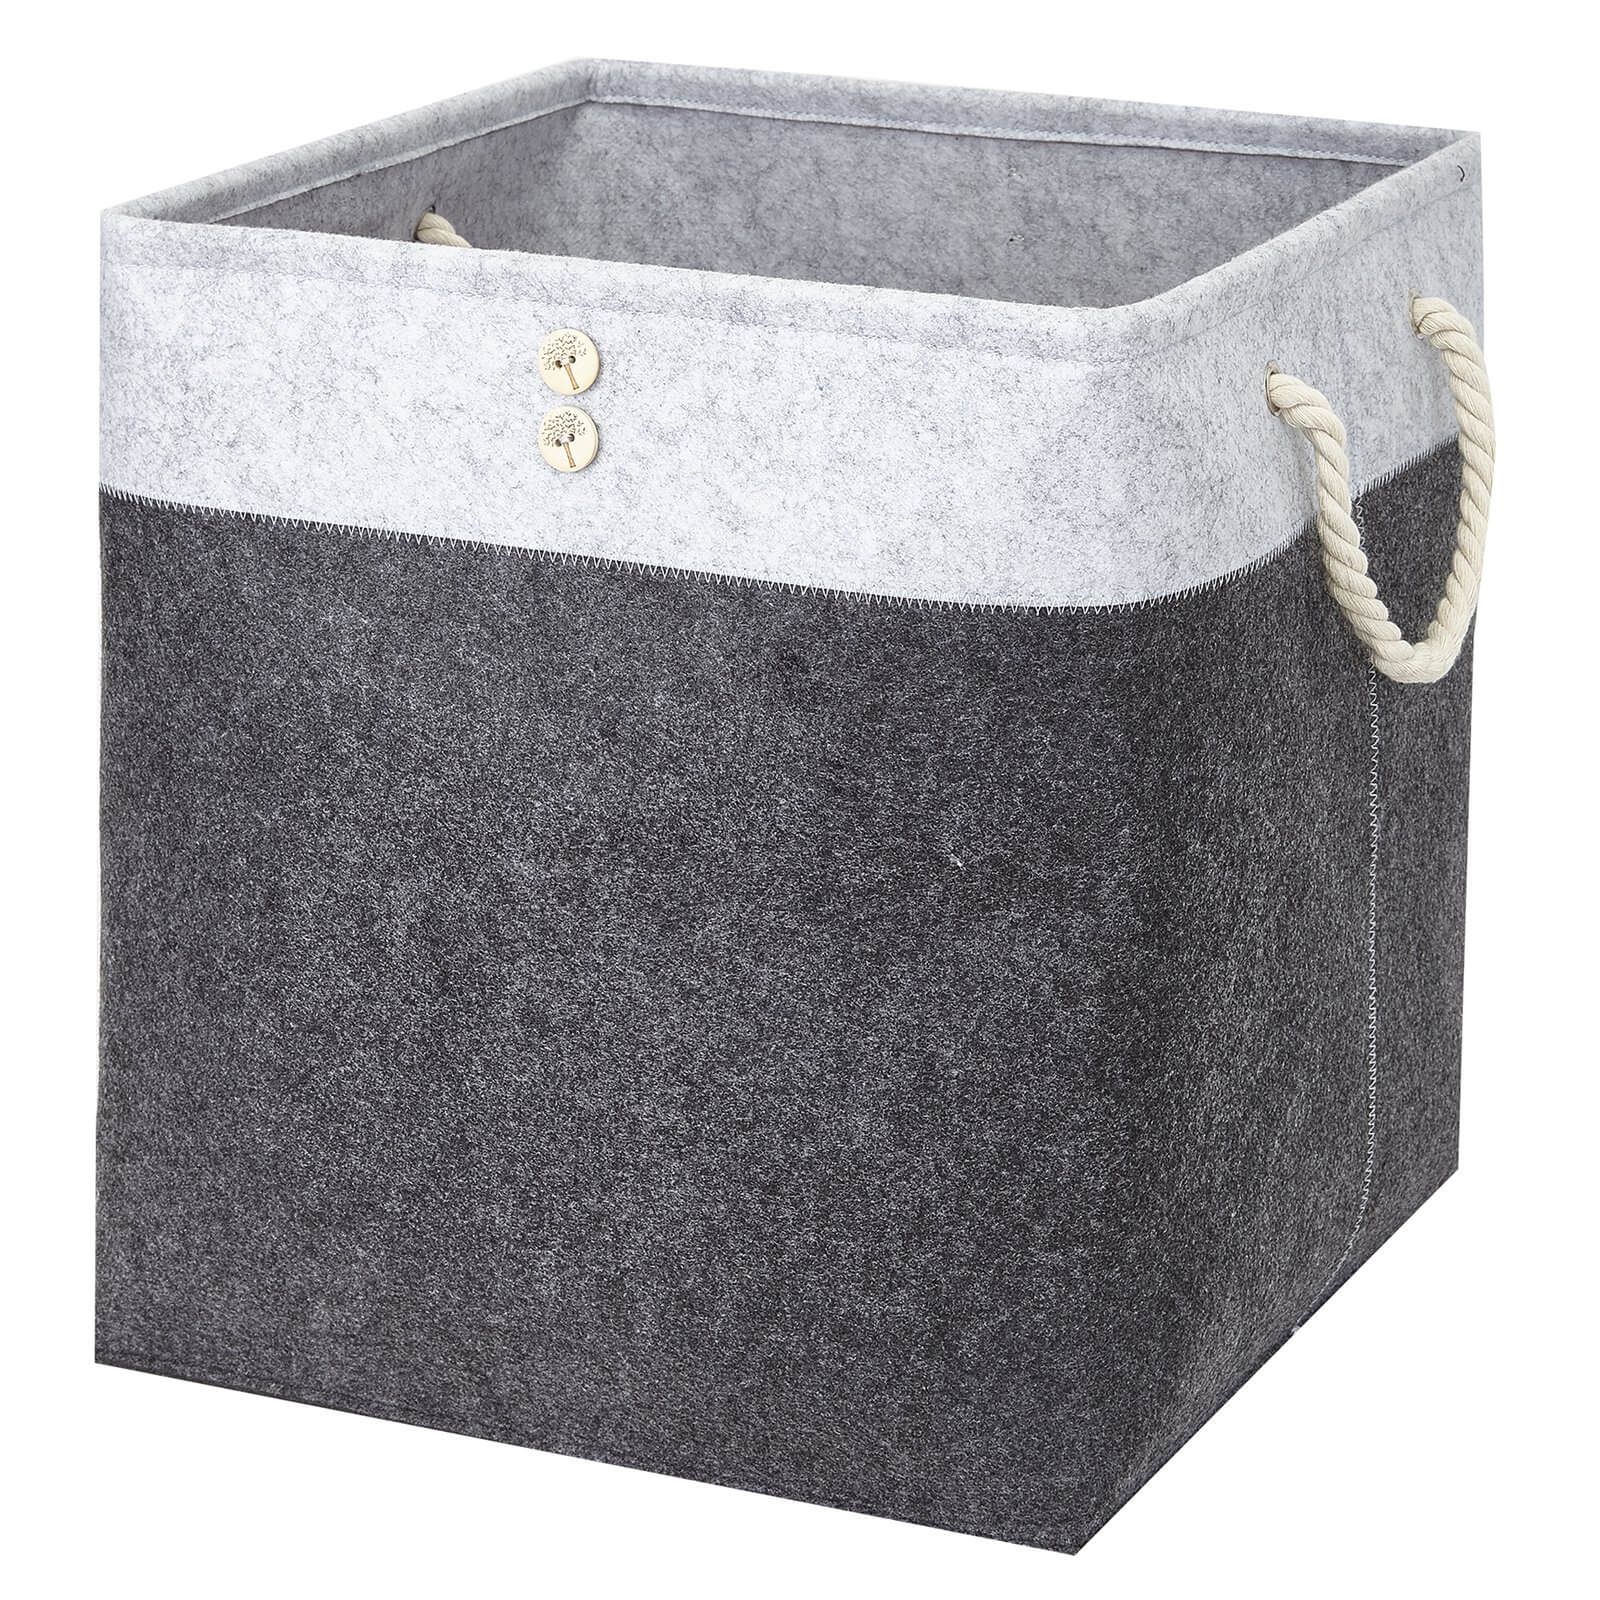 Felt Storage Box with Buttons